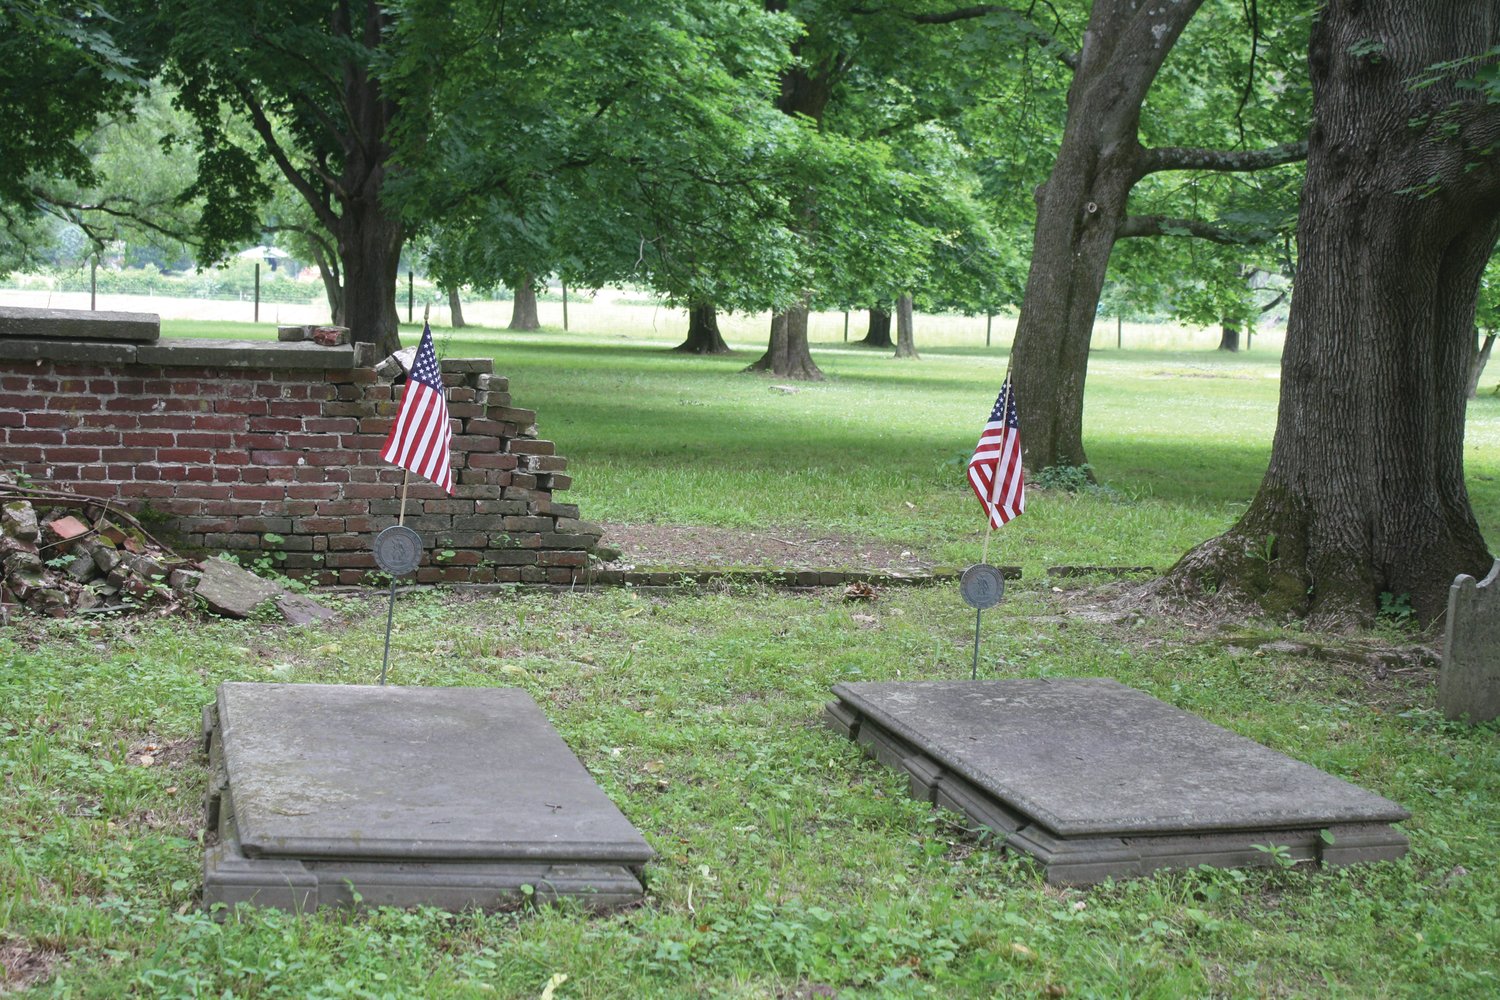 Col. Arthur Erwin is one of the Revolutionary War officers buried in the Erwin Family Cemetery along the River Road in Tinicum Township.